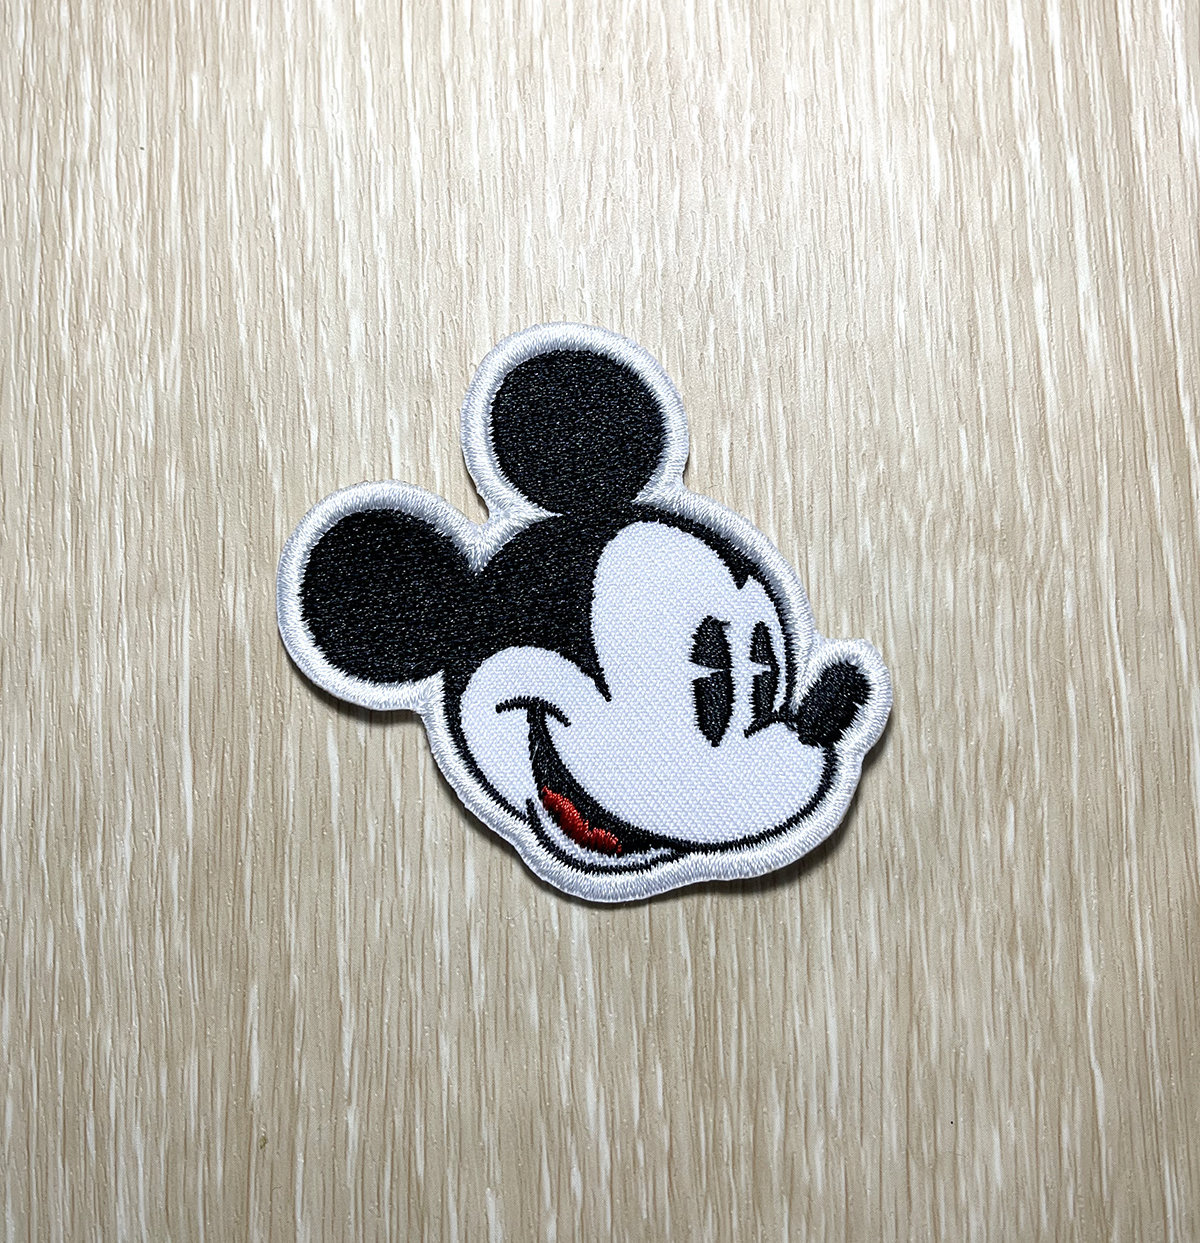 Color : #1 Kids, Boys Sew On Applique Patch Custom Backpack Patches for Men Dark blue sea Towel-Embroidered Mickey Mouse Embroidery Patches 